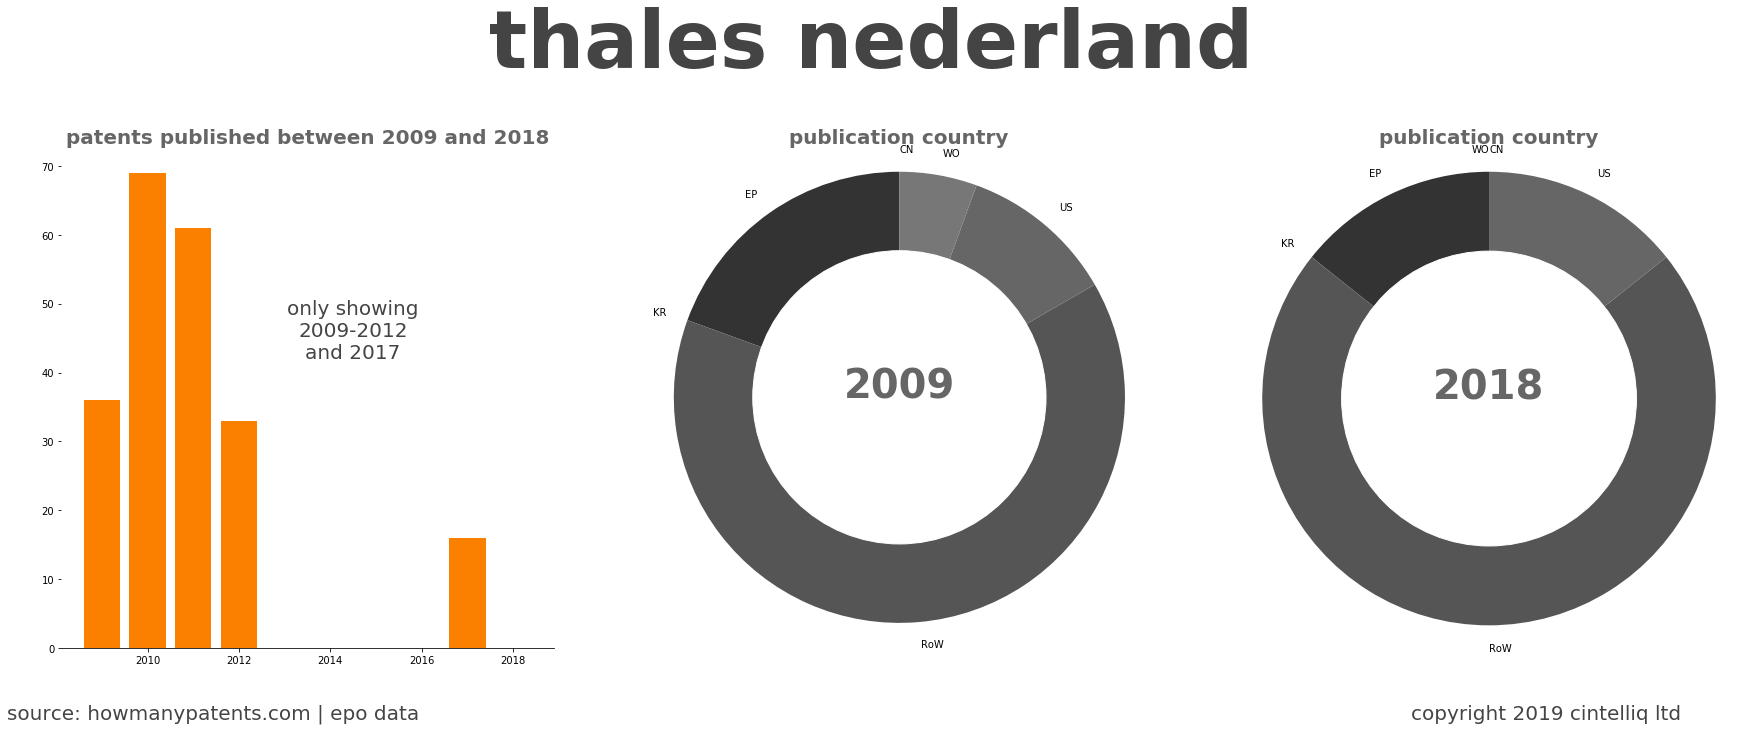 summary of patents for Thales Nederland